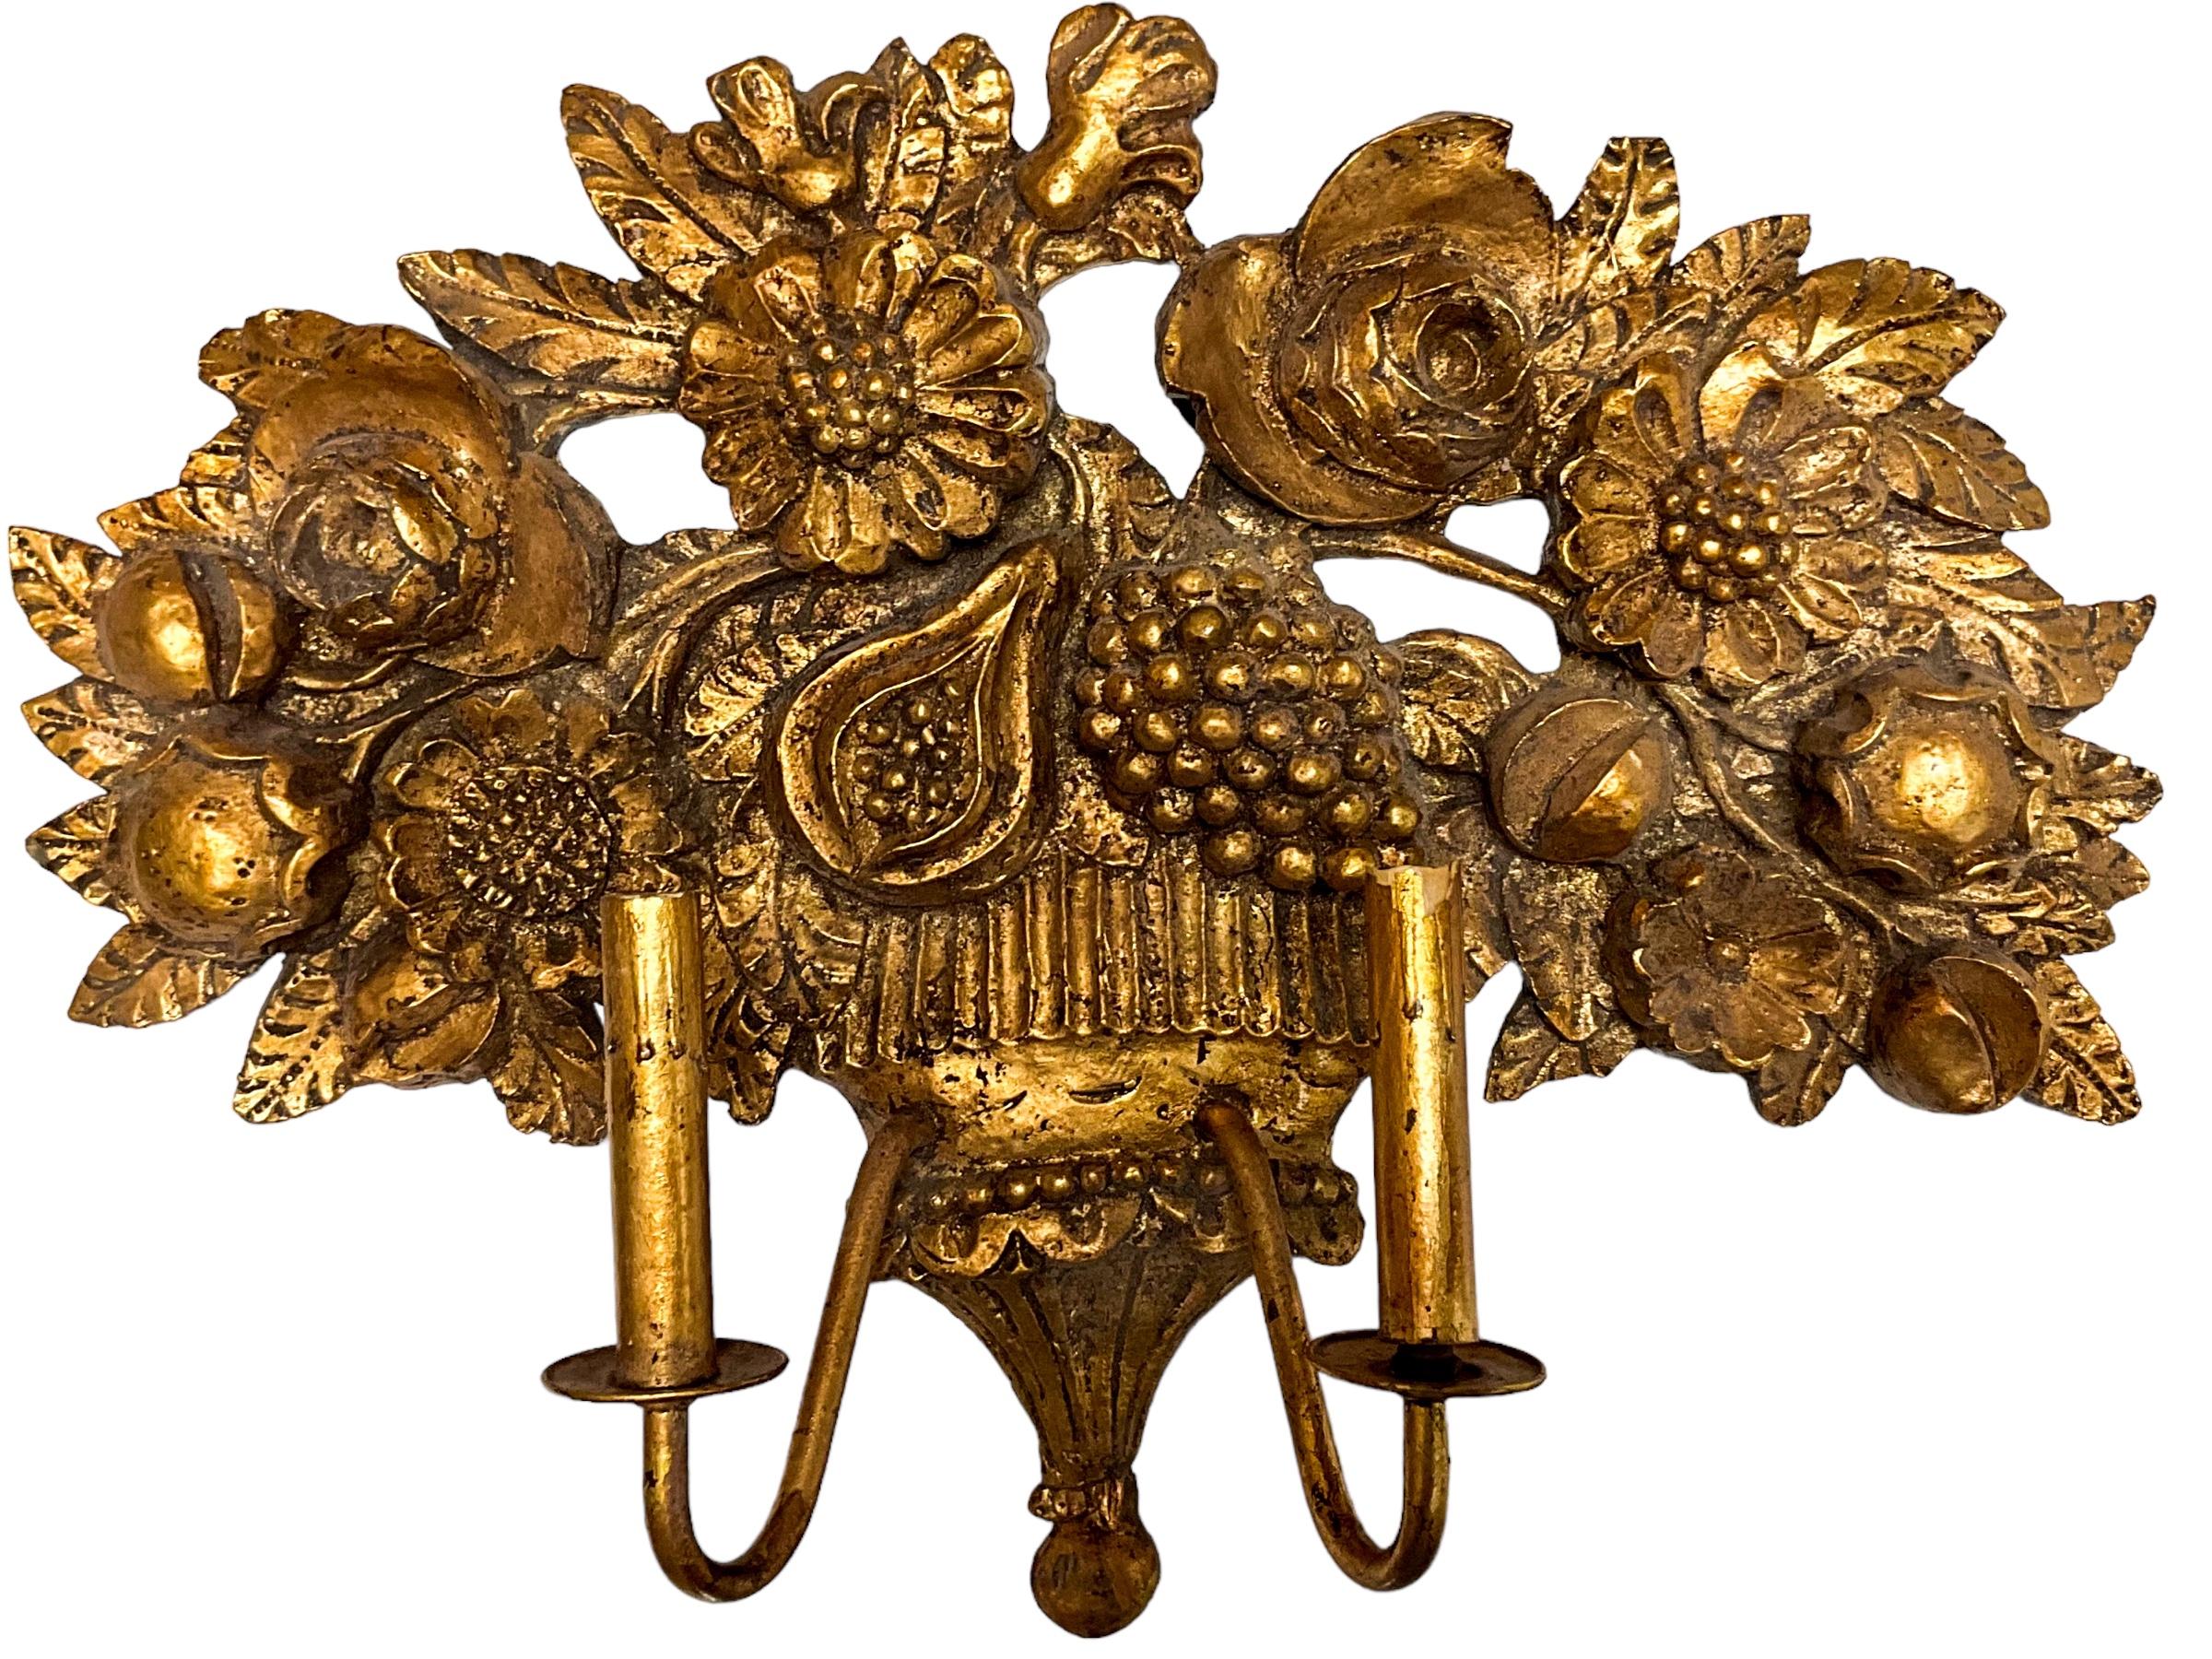 20th Century Mid-Century Large Scale Italian Regency Style Cast Plaster & Gesso Gilt Sconce  For Sale